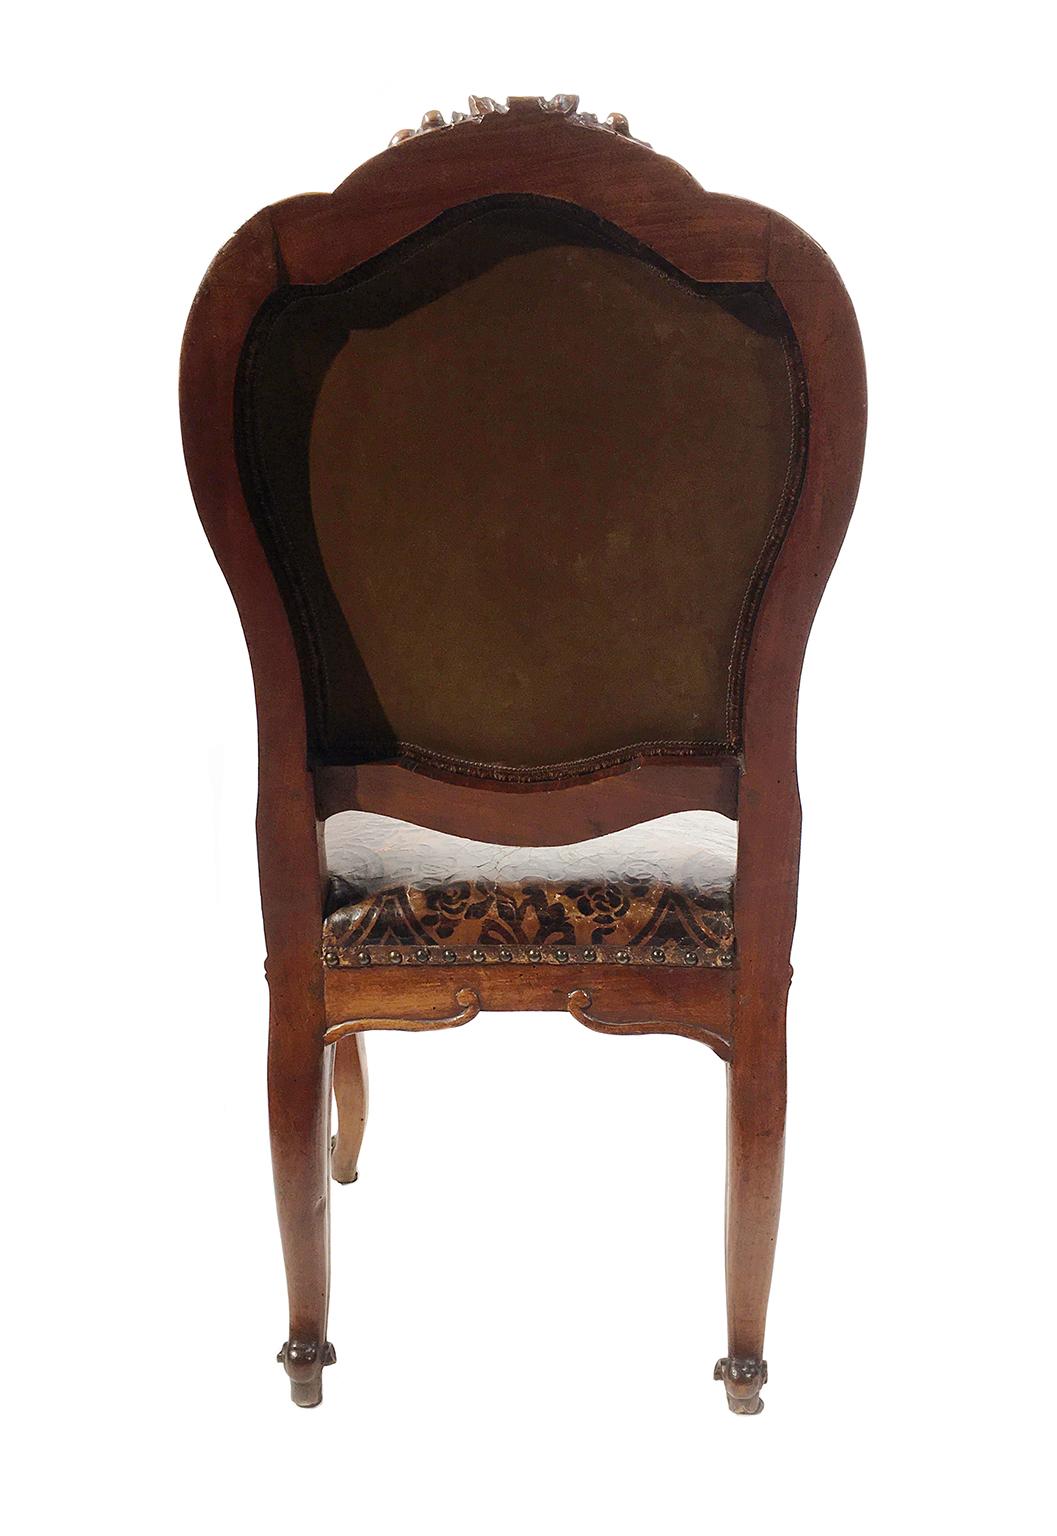 Italian Carved Walnut Chairs with Leather Covers, Milan, circa 1750 For Sale 2